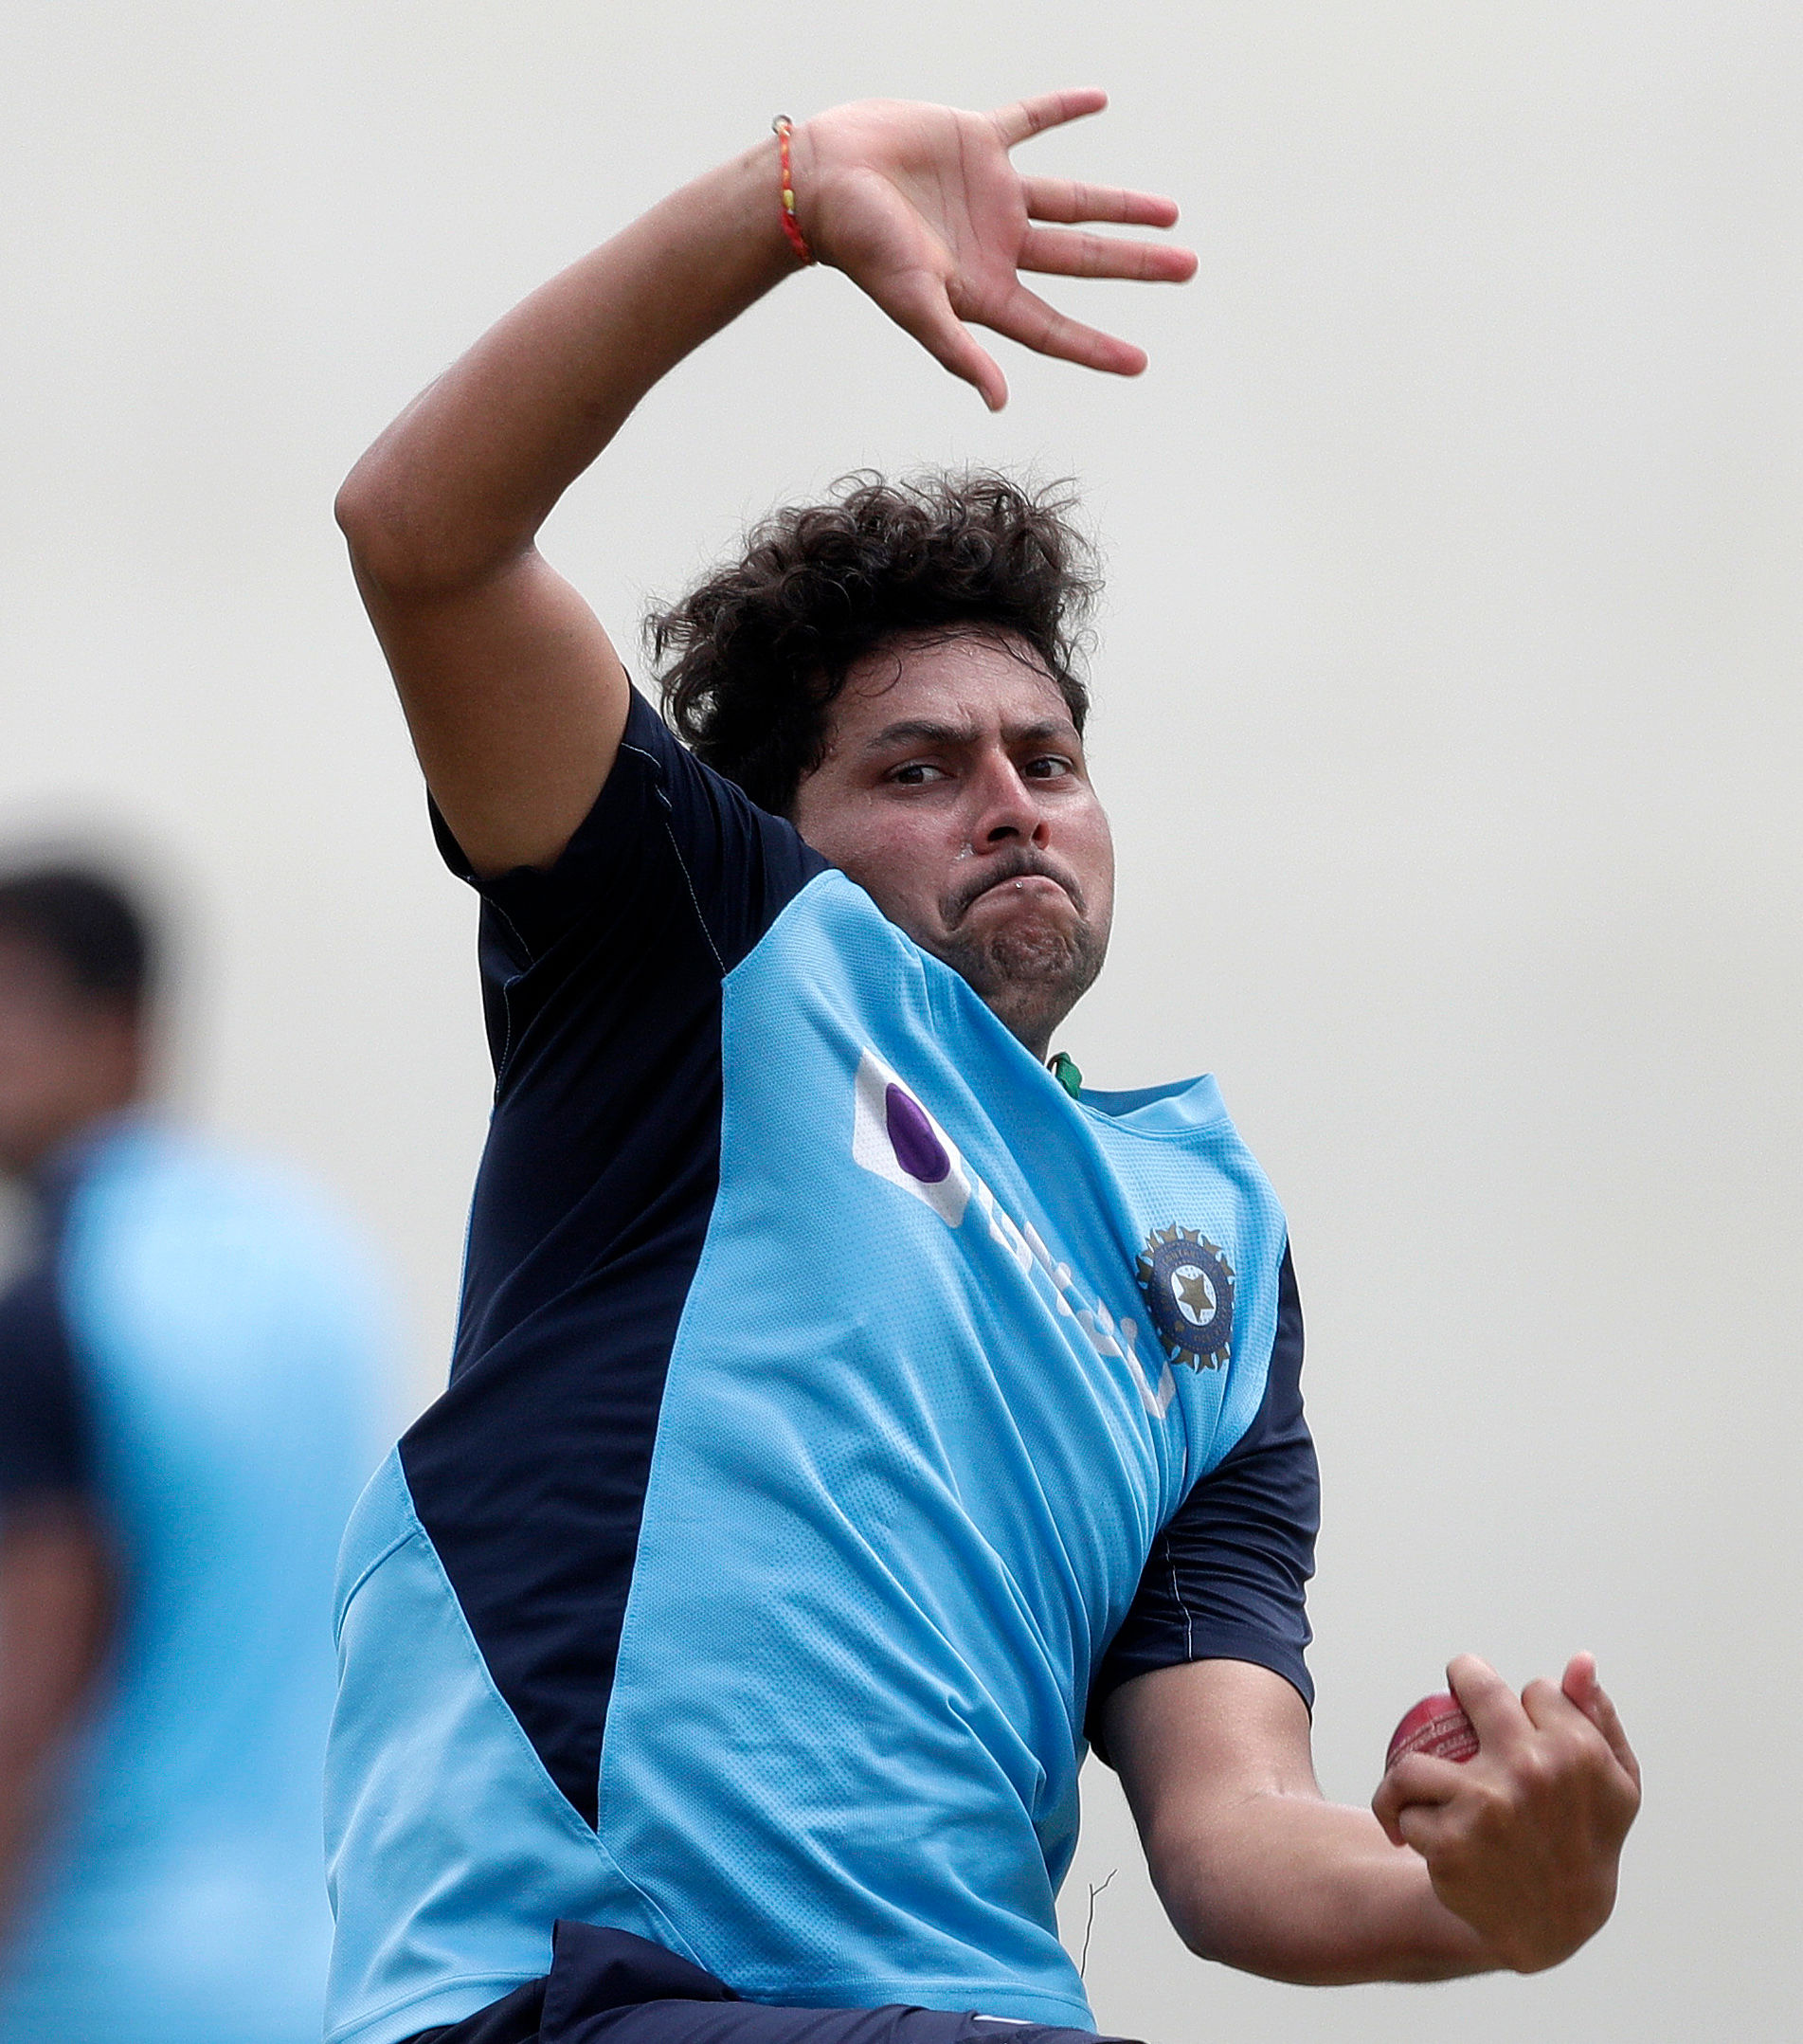 Harbhajan Singh believes Kuldeep Yadav can deliver the goods, wants team India to back him